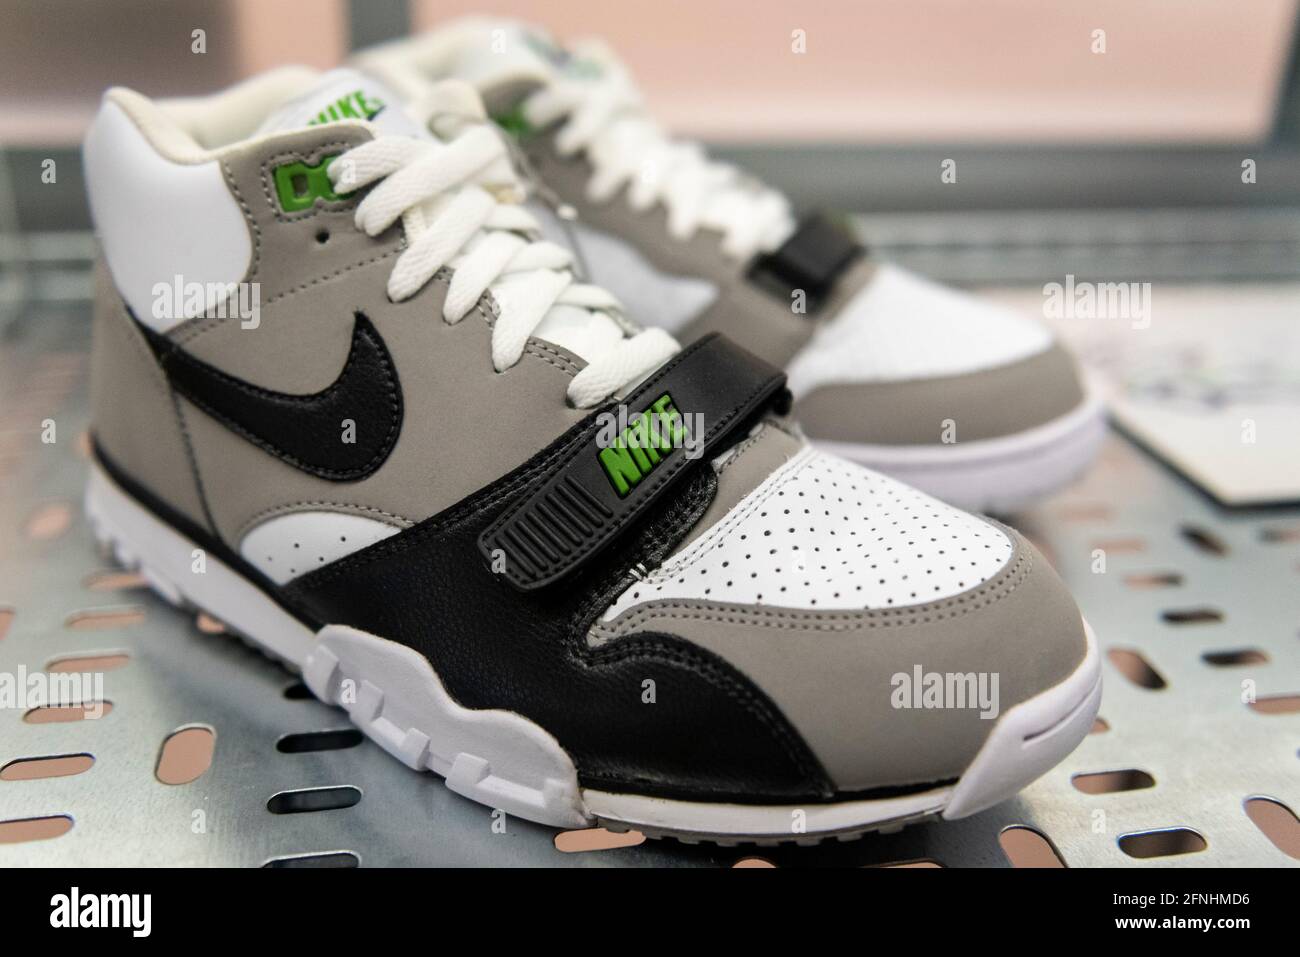 London, UK. 17 May 2021. "Nike Air Trainer, 2012, first released 1987 and the first multi-purpose 'cross-trainer', debuted by John McEnroe in 1986. Preview of “Sneakers Unboxed: Studio to Street” at